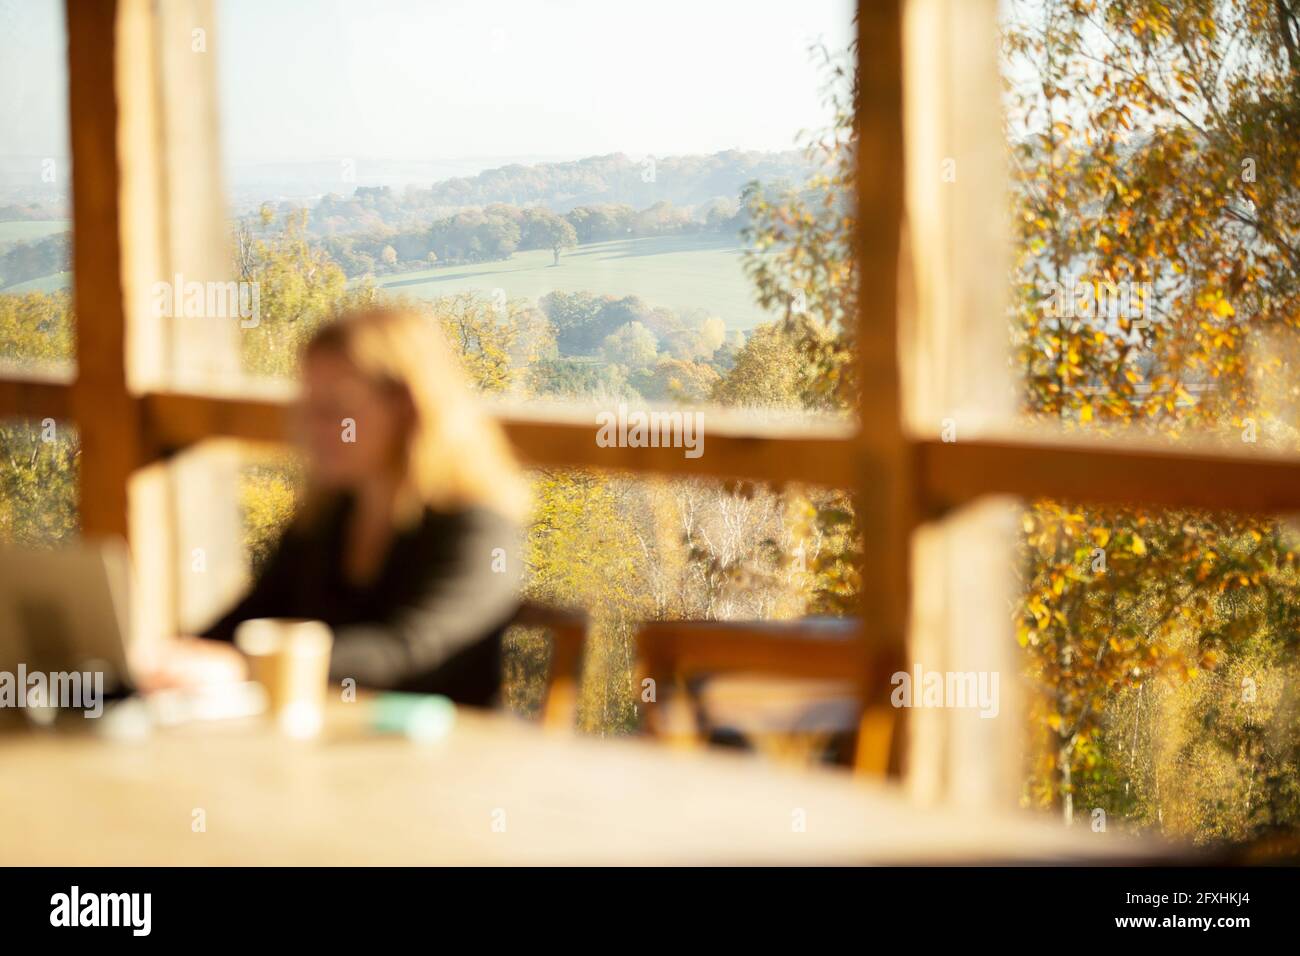 Woman working in cafe with sunny scenic autumn view Stock Photo